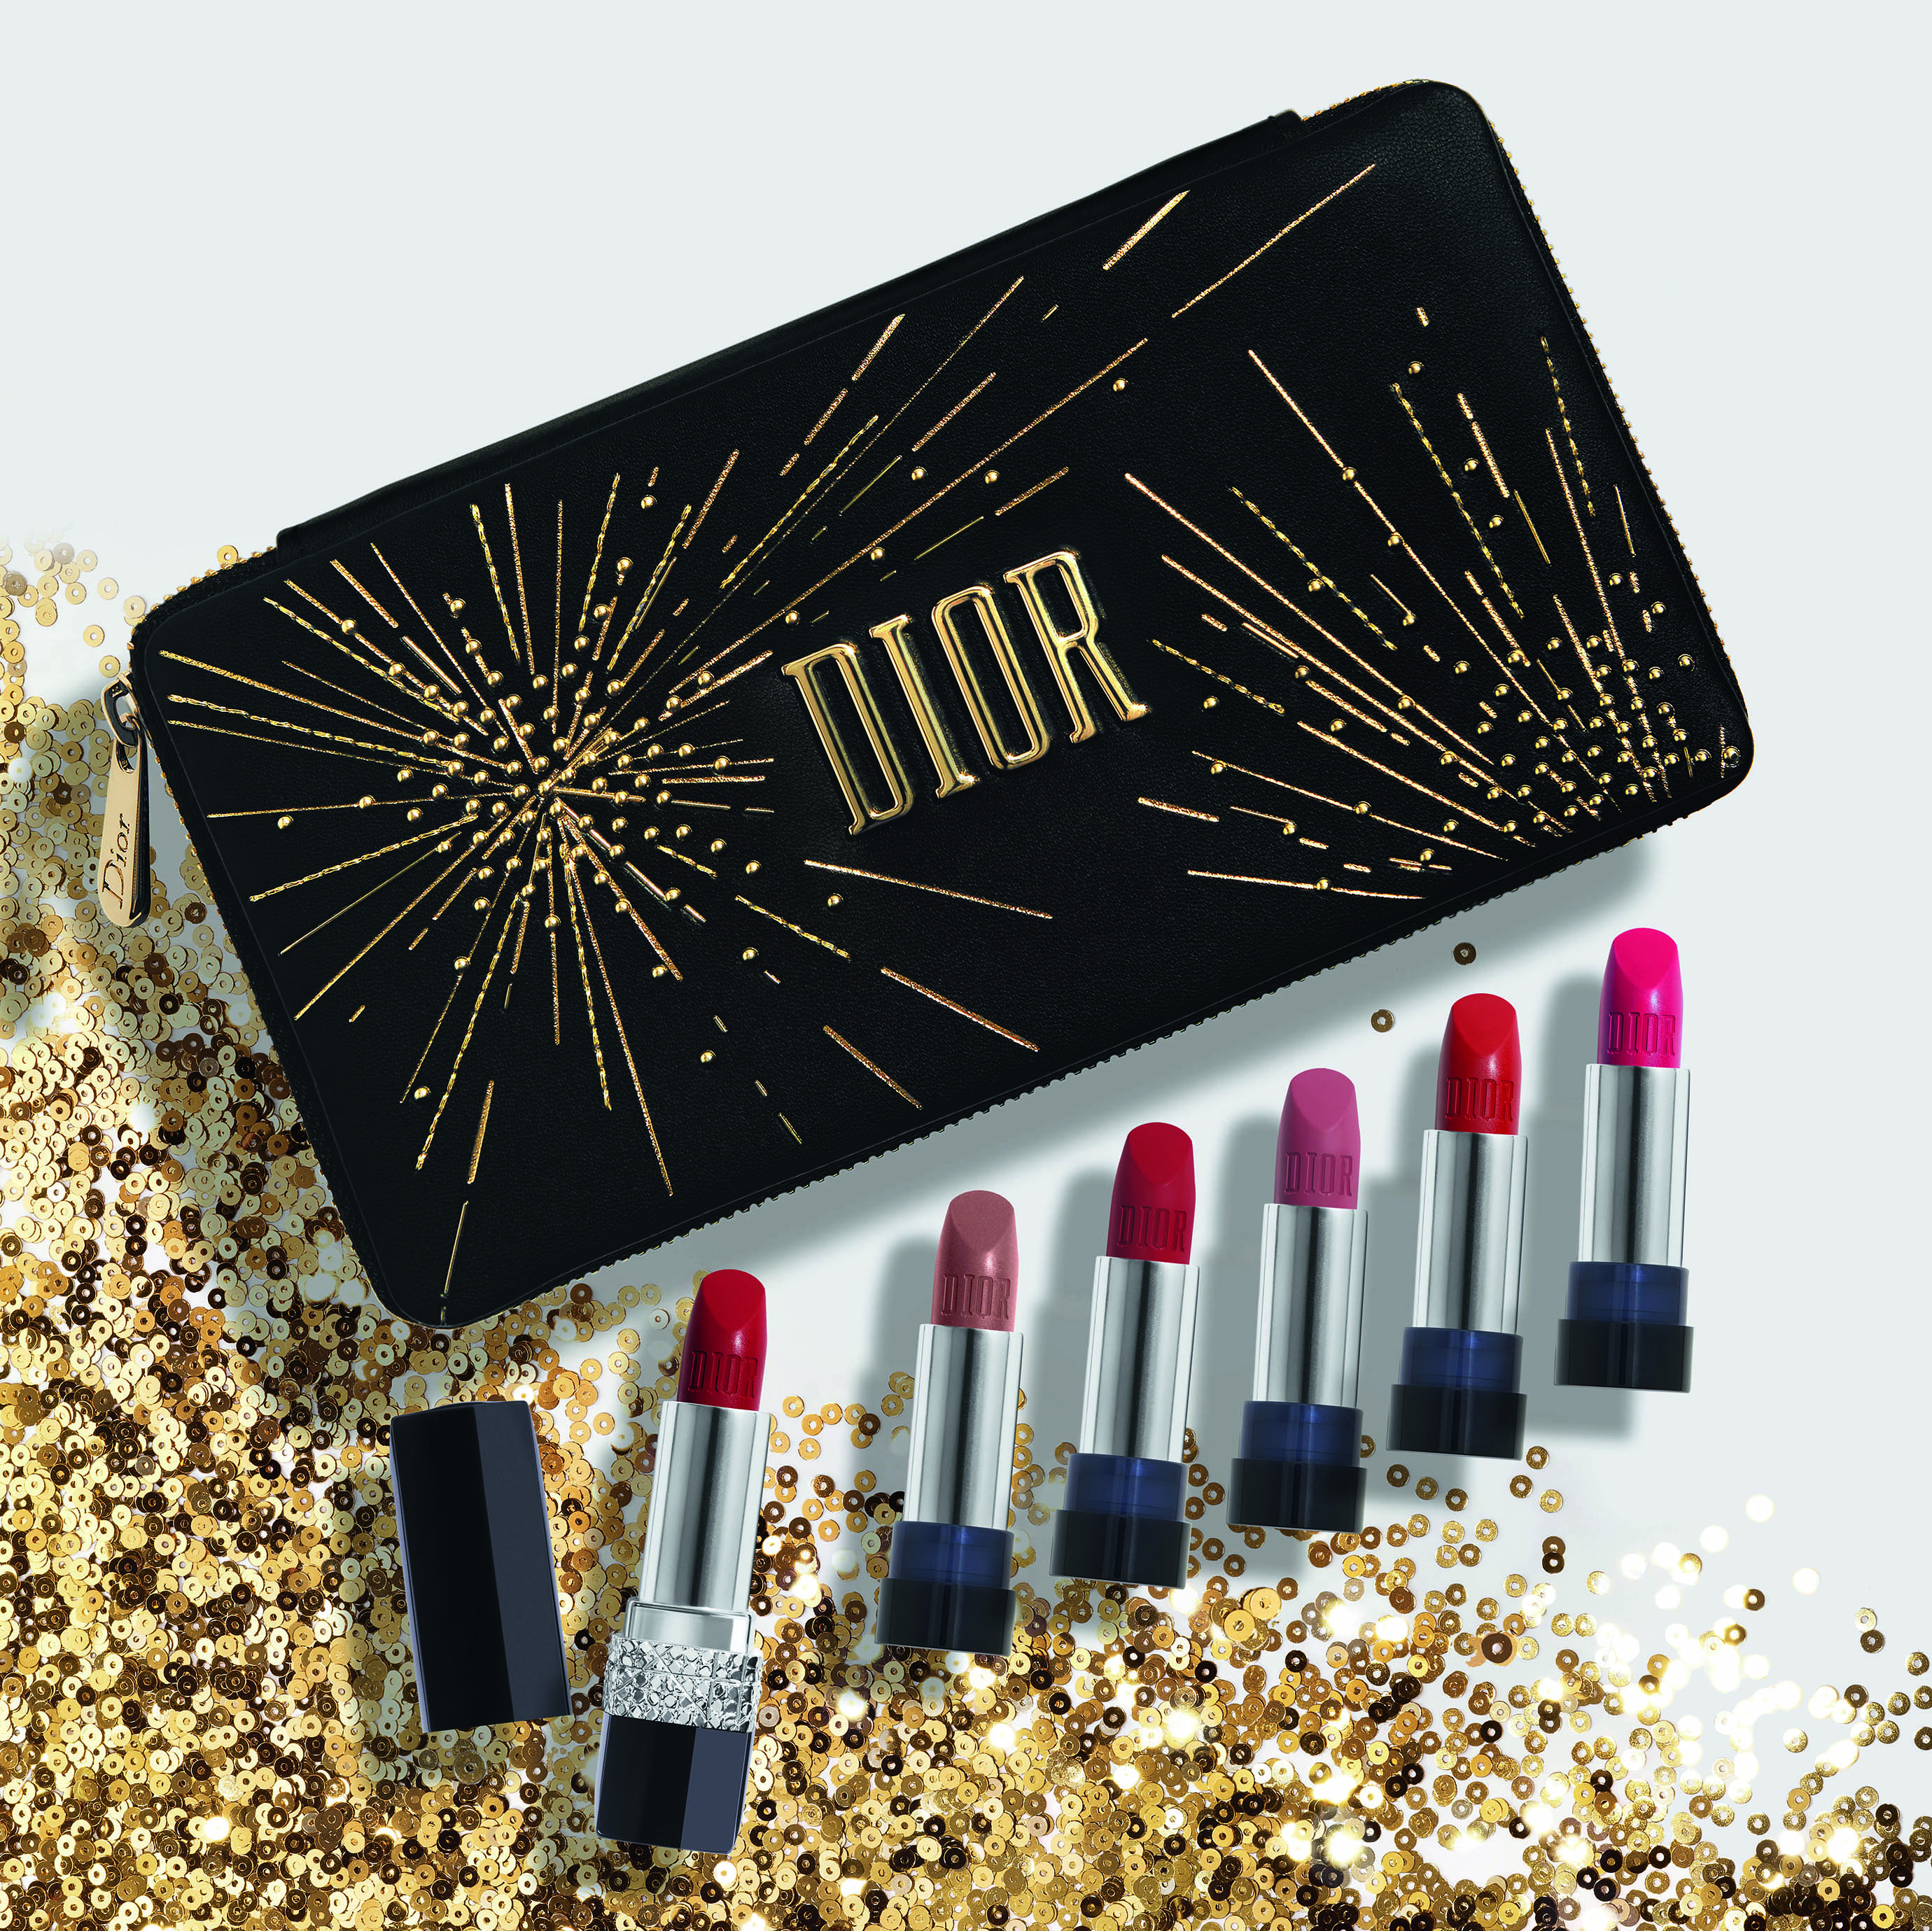 dior beauty gift with purchase moon cakes｜TikTok Search